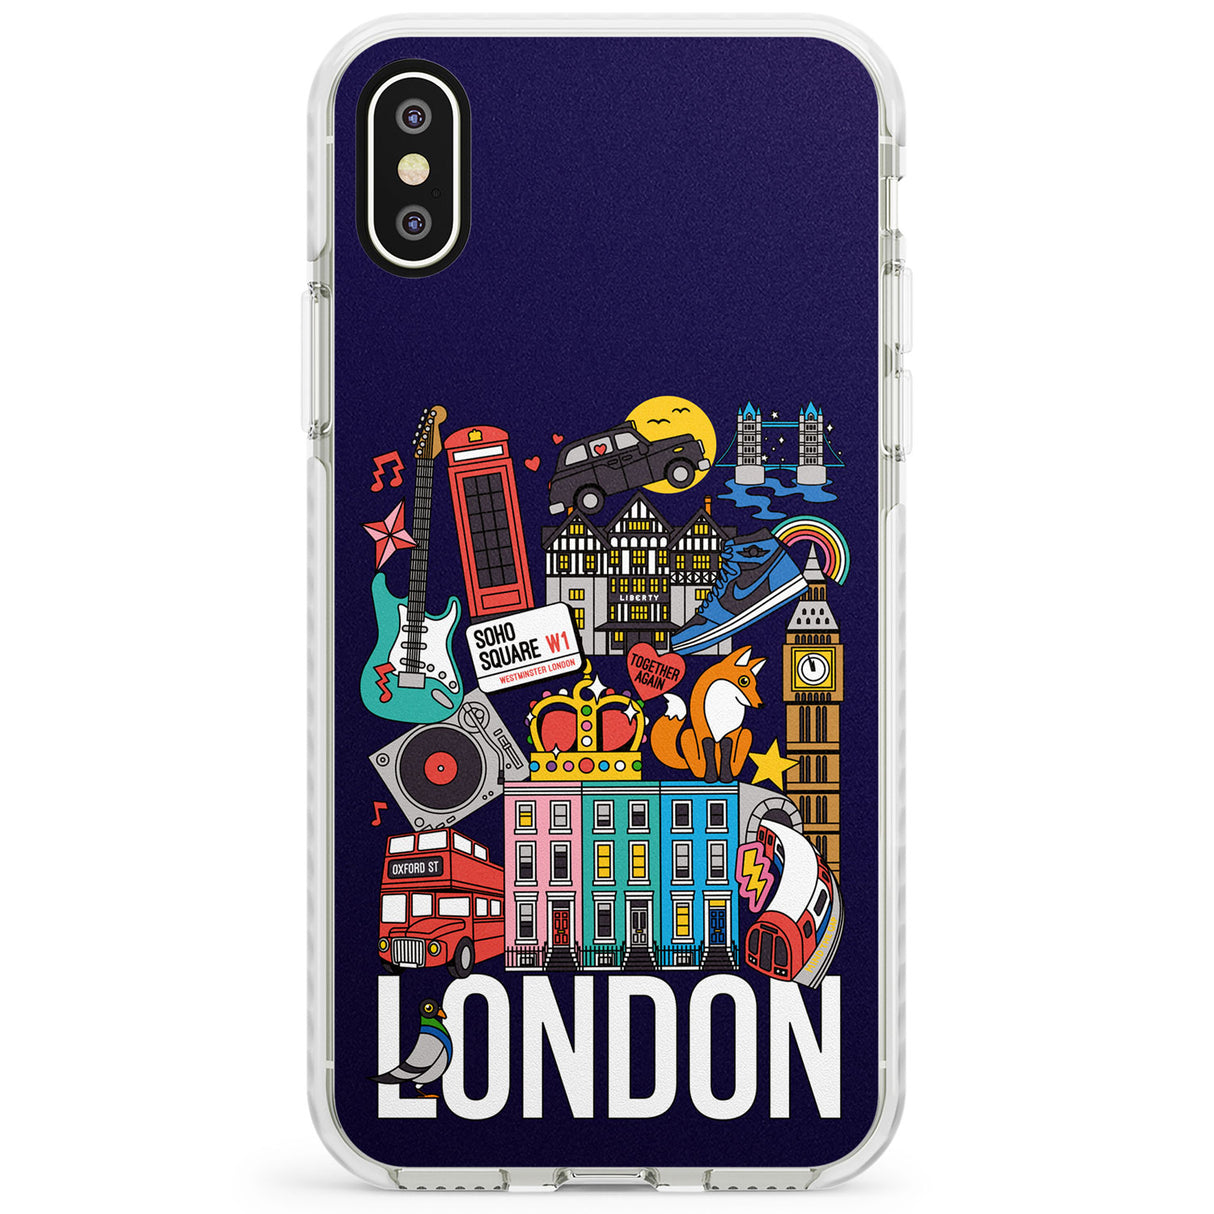 London Calling Impact Phone Case for iPhone X XS Max XR